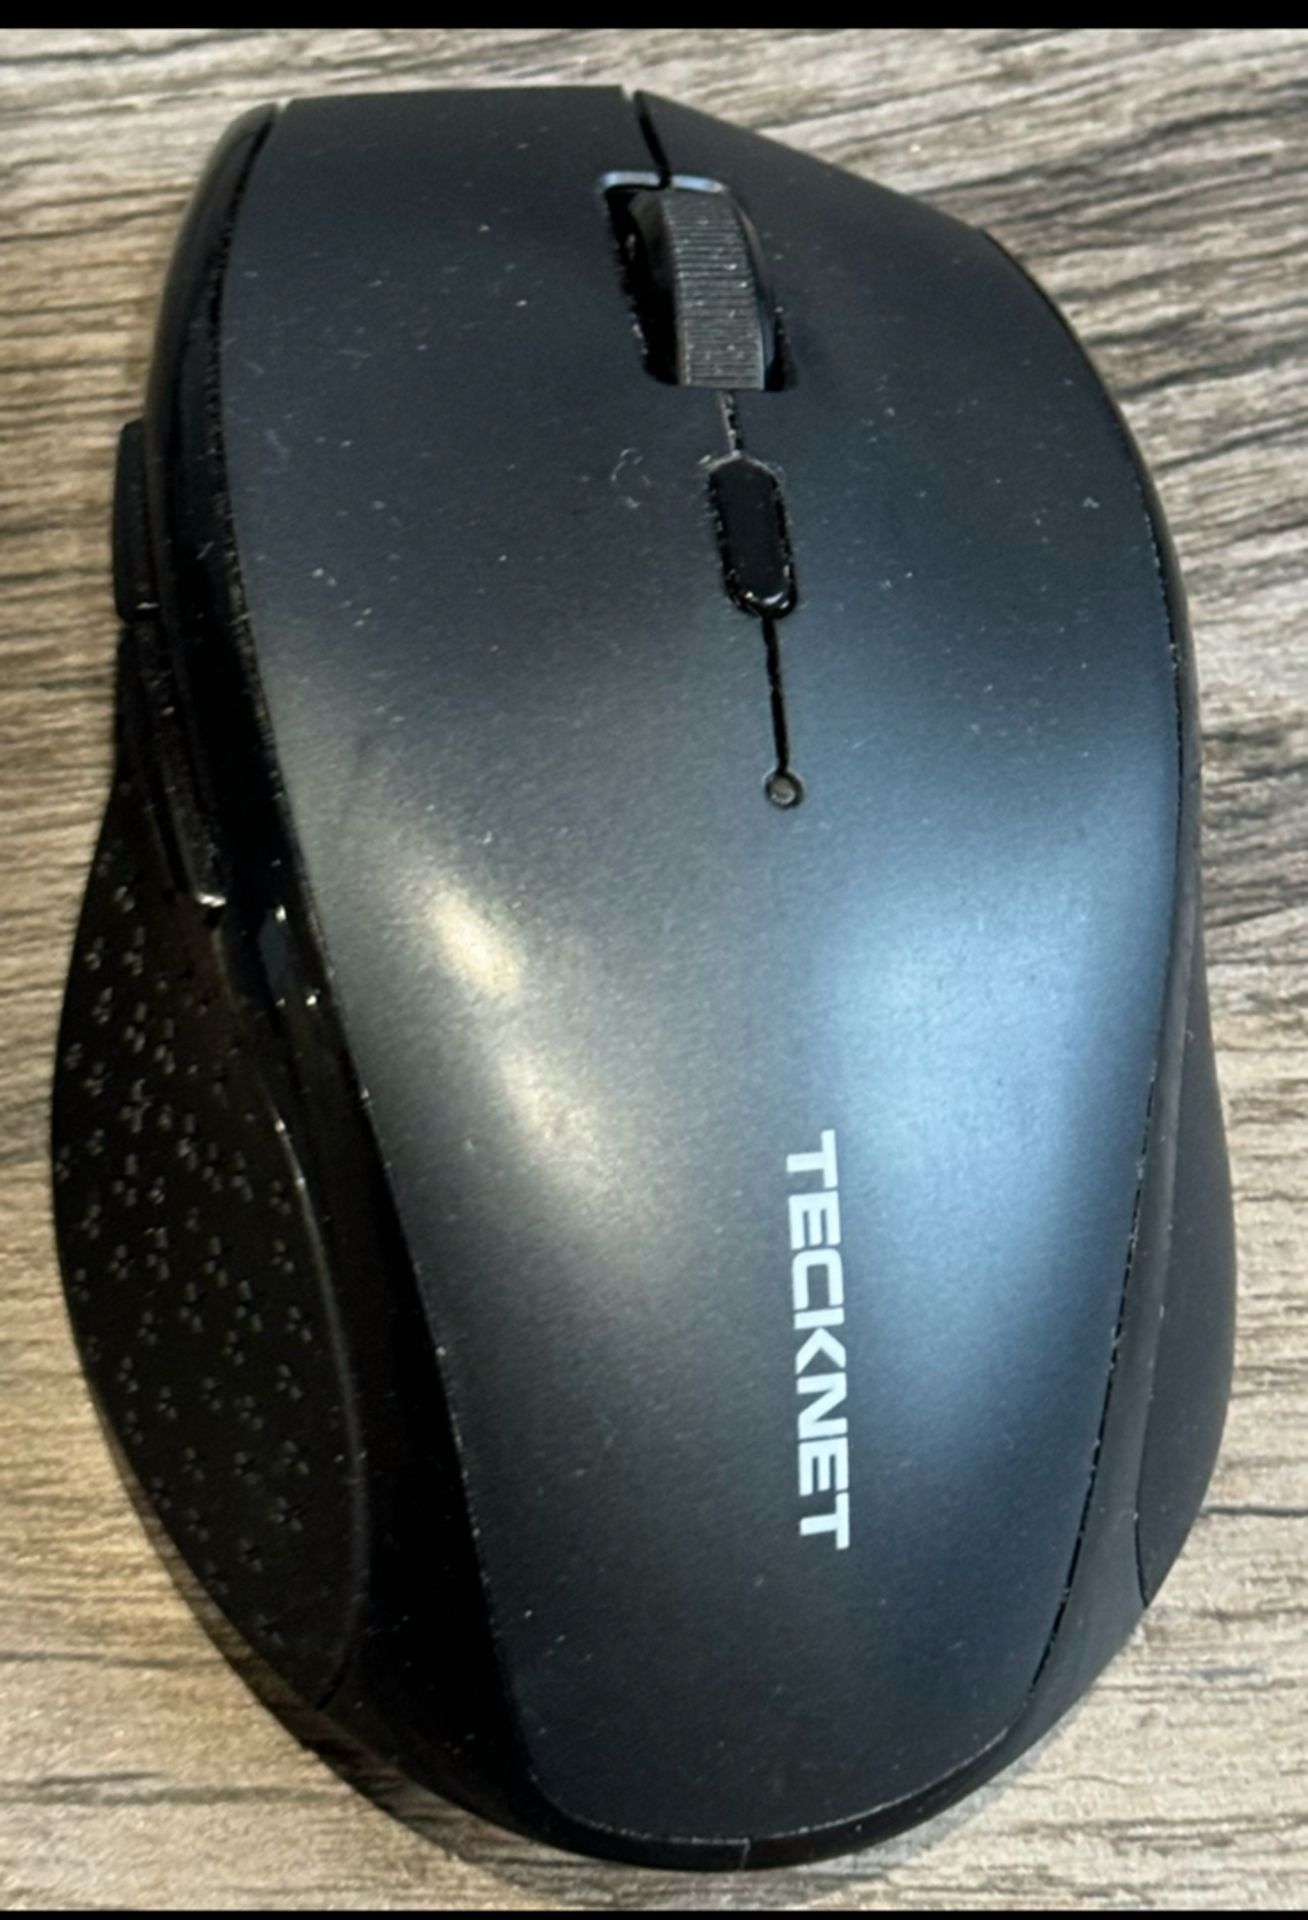 Tecknet Wireless Mouse with USB Connection - Good Condition